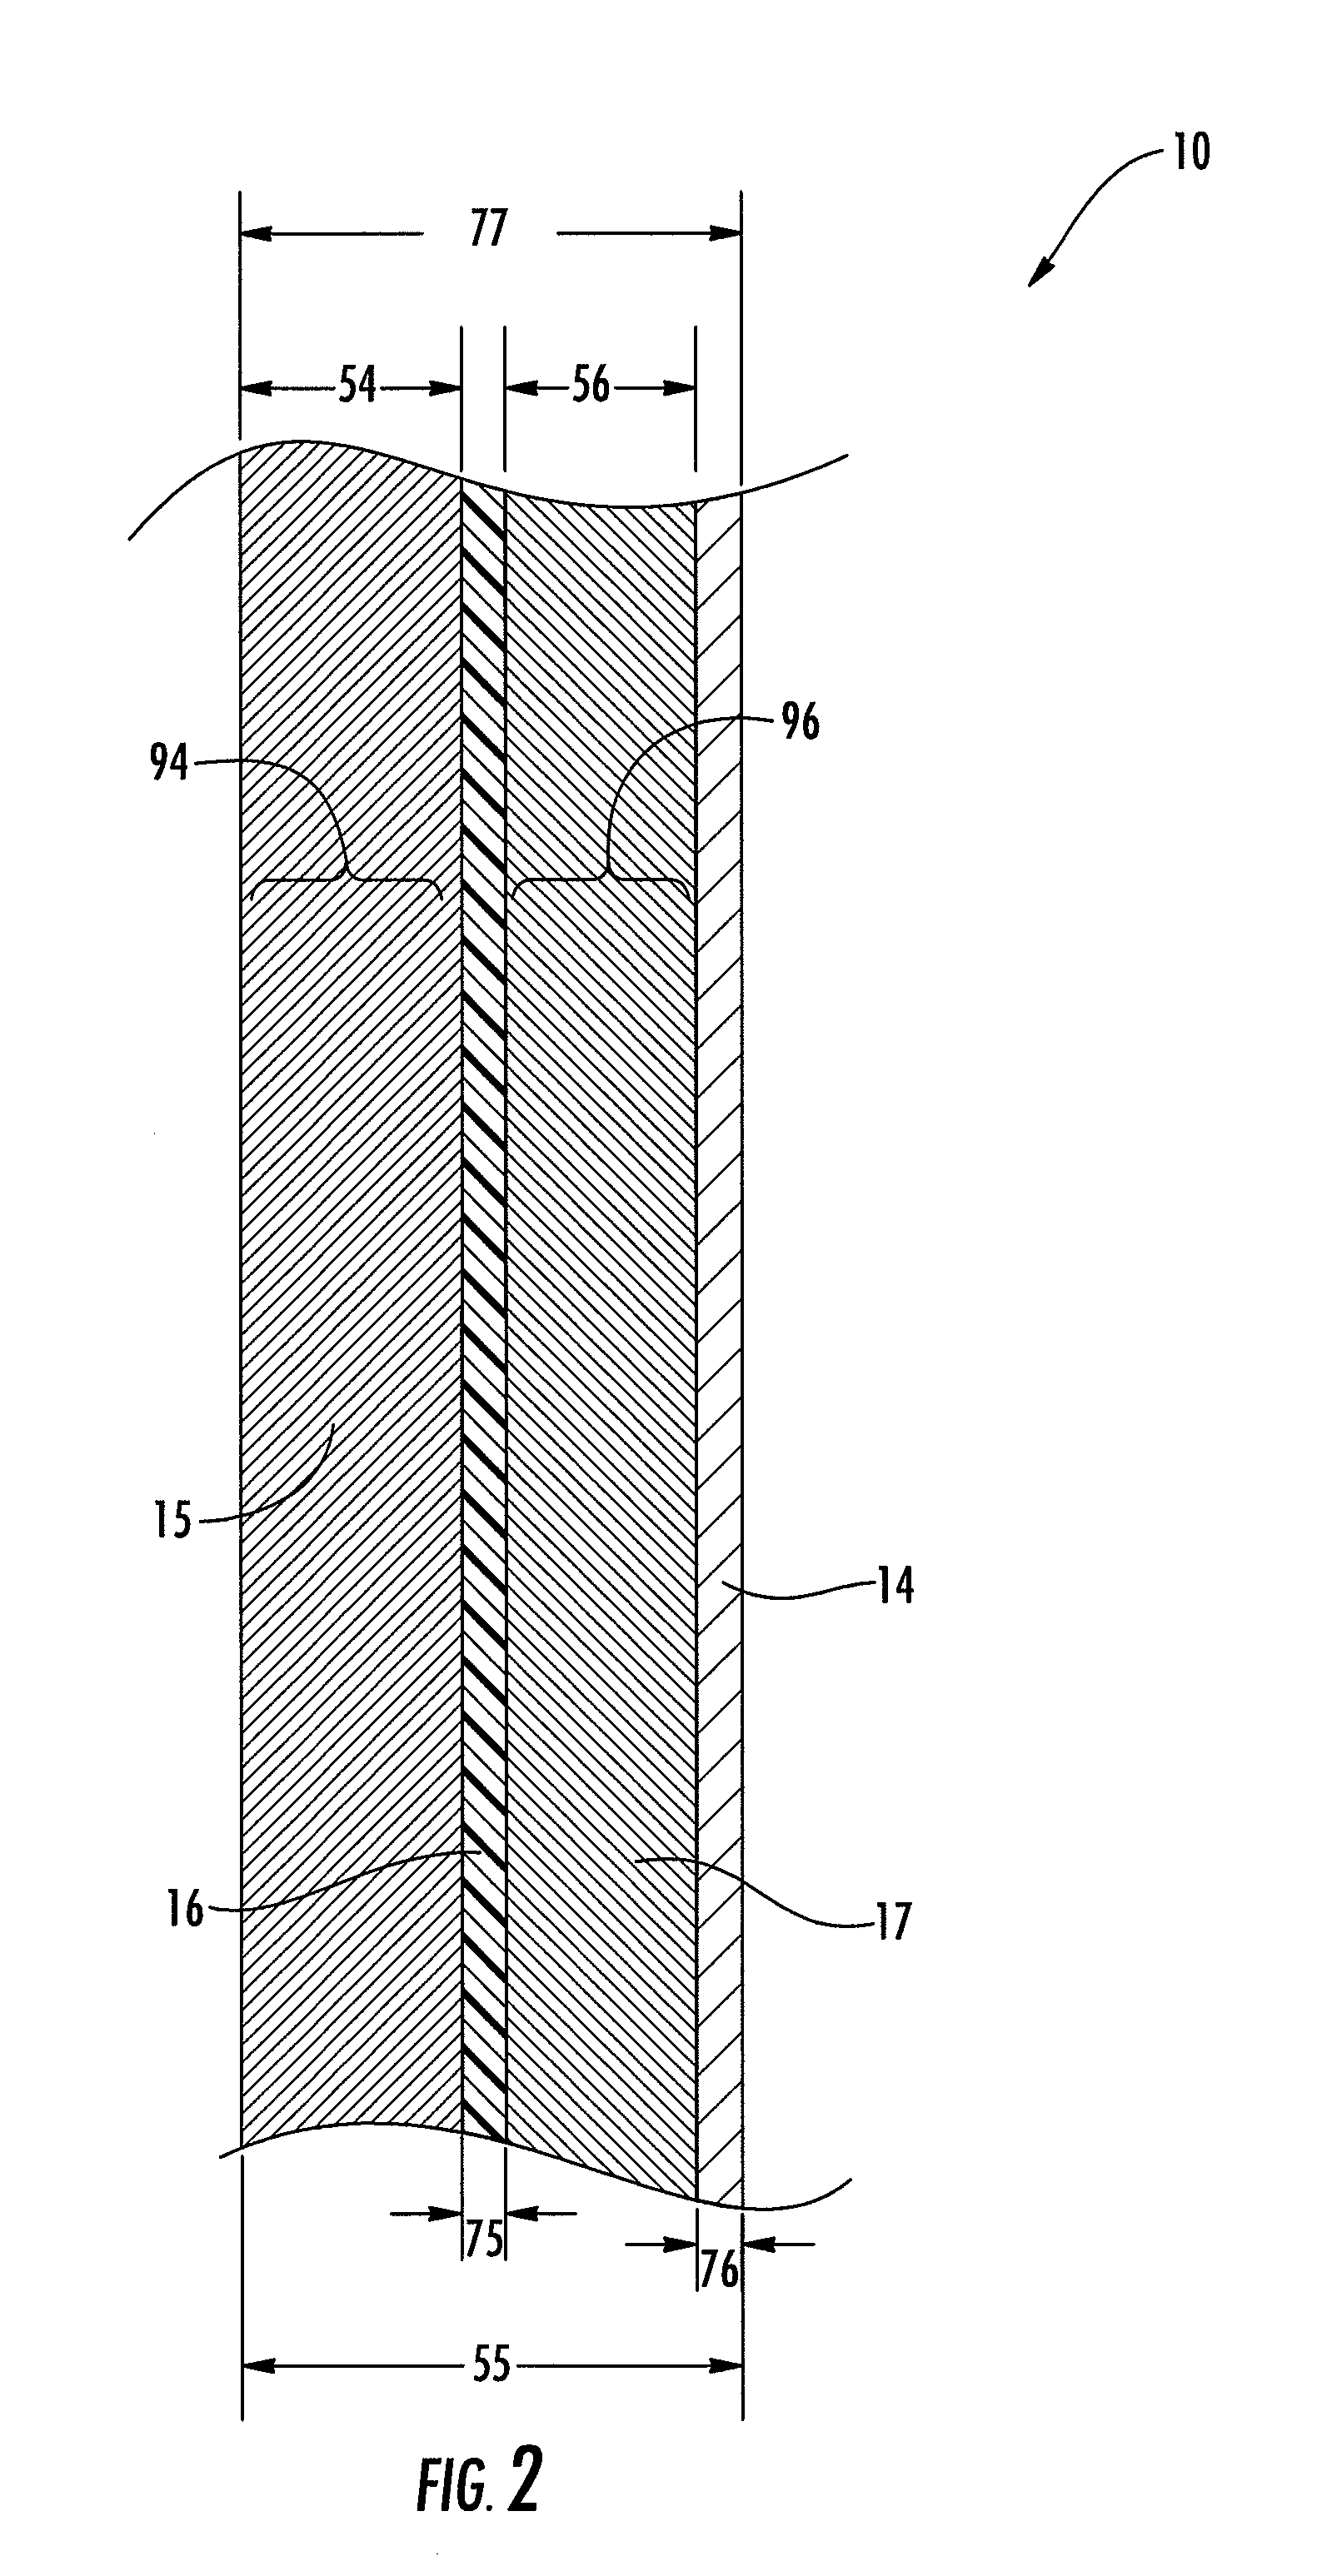 Apparatuses and Methods for an Improved Lath, Vapor Control Layer and Rain Screen Assembly